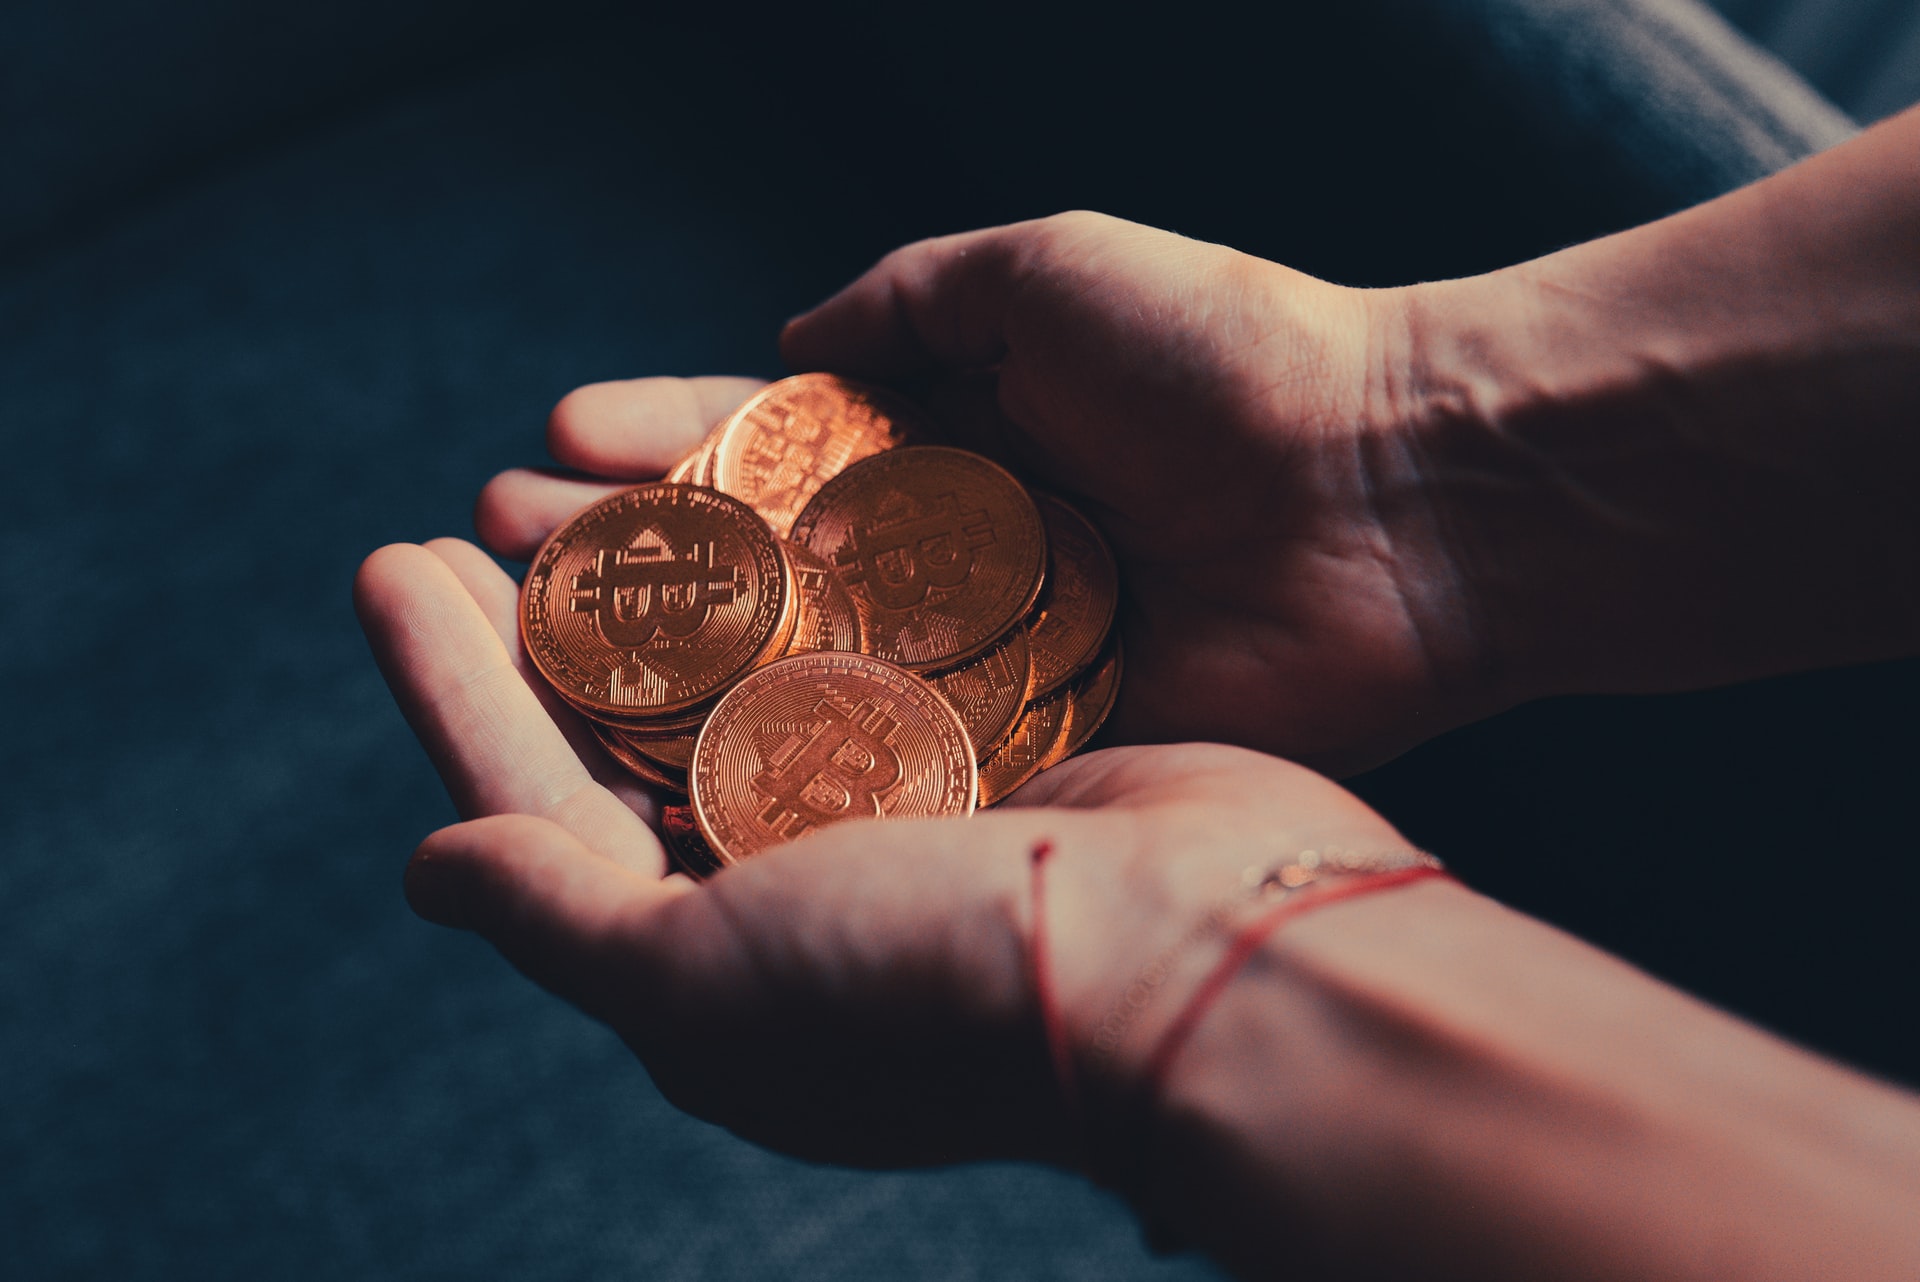 You can invest in any kind of crypto! Source: Unsplash.